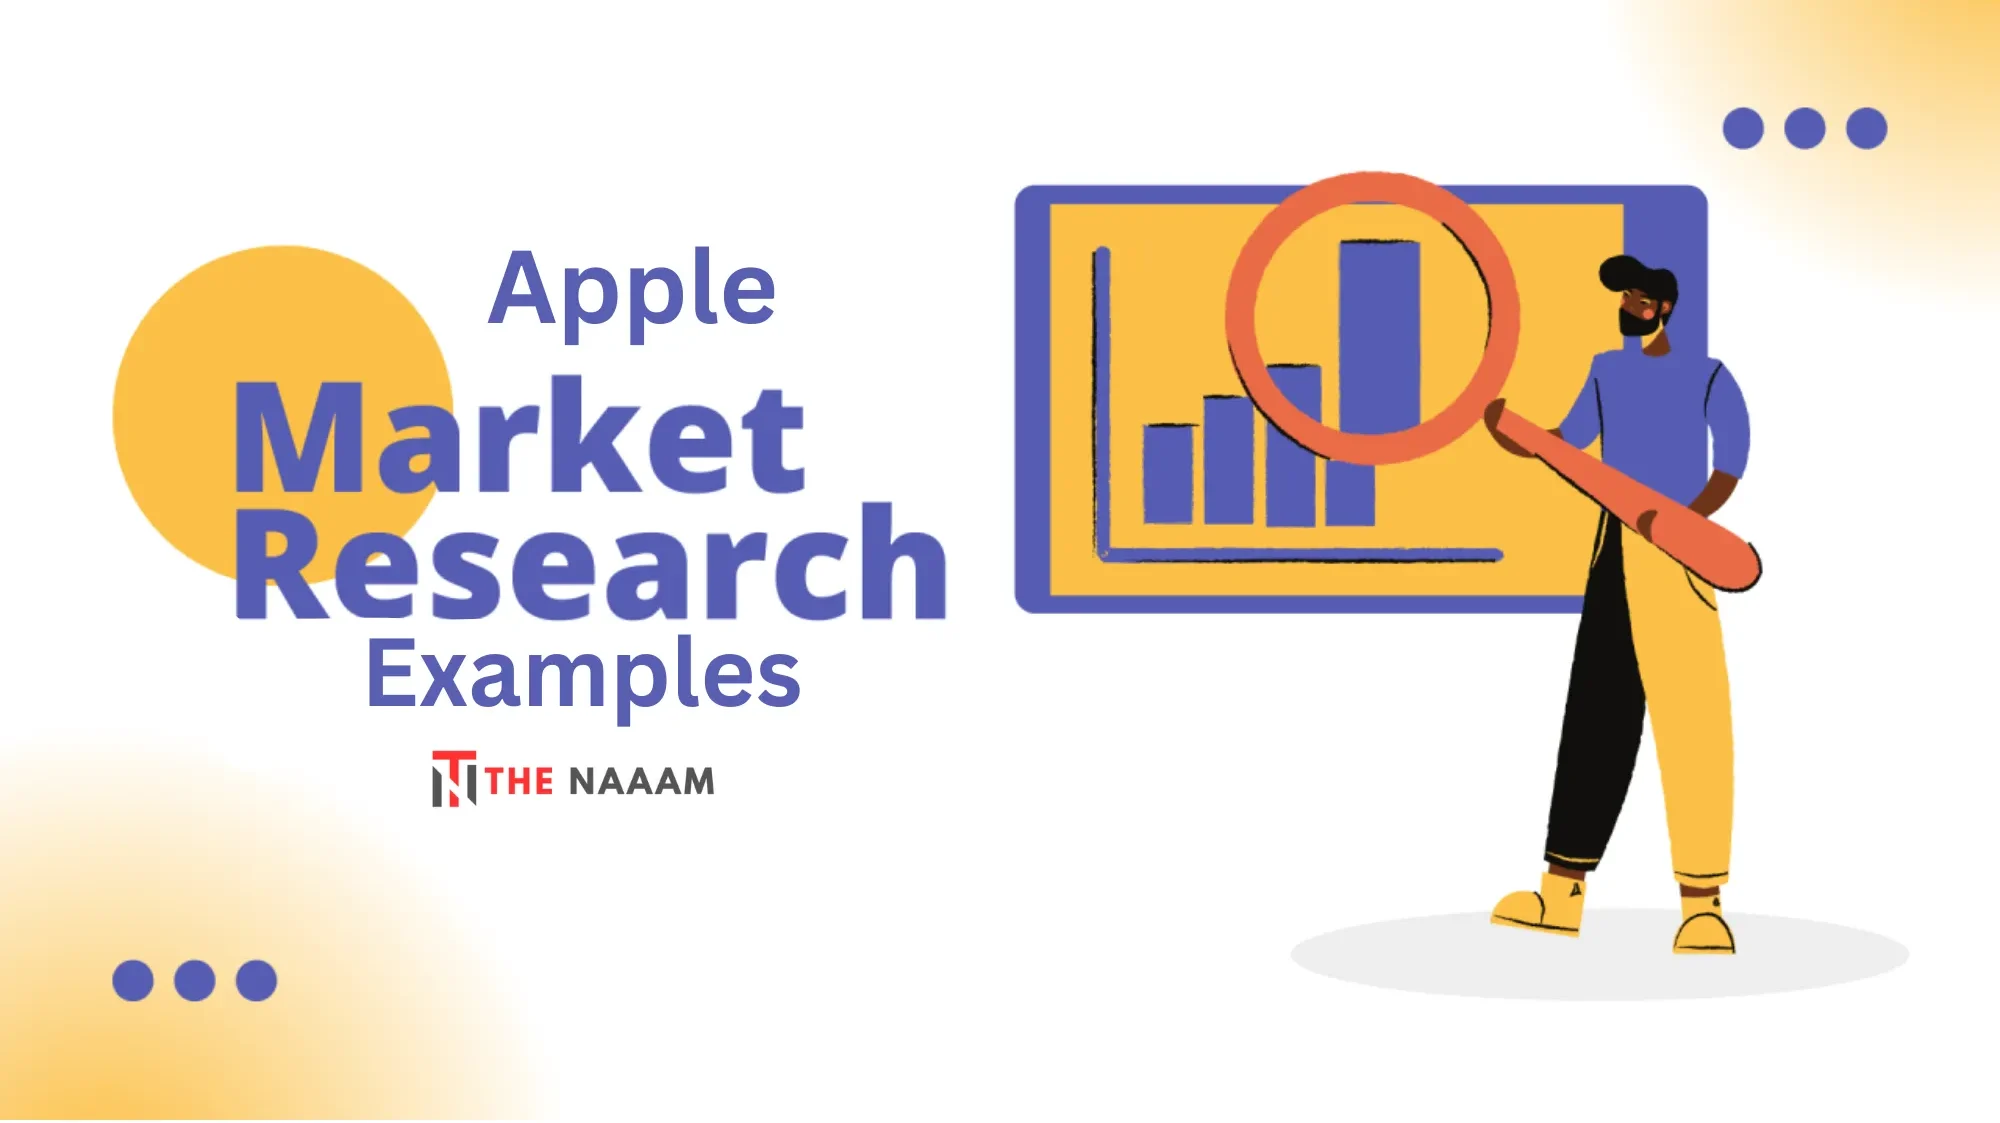 Apple Market Research Examples